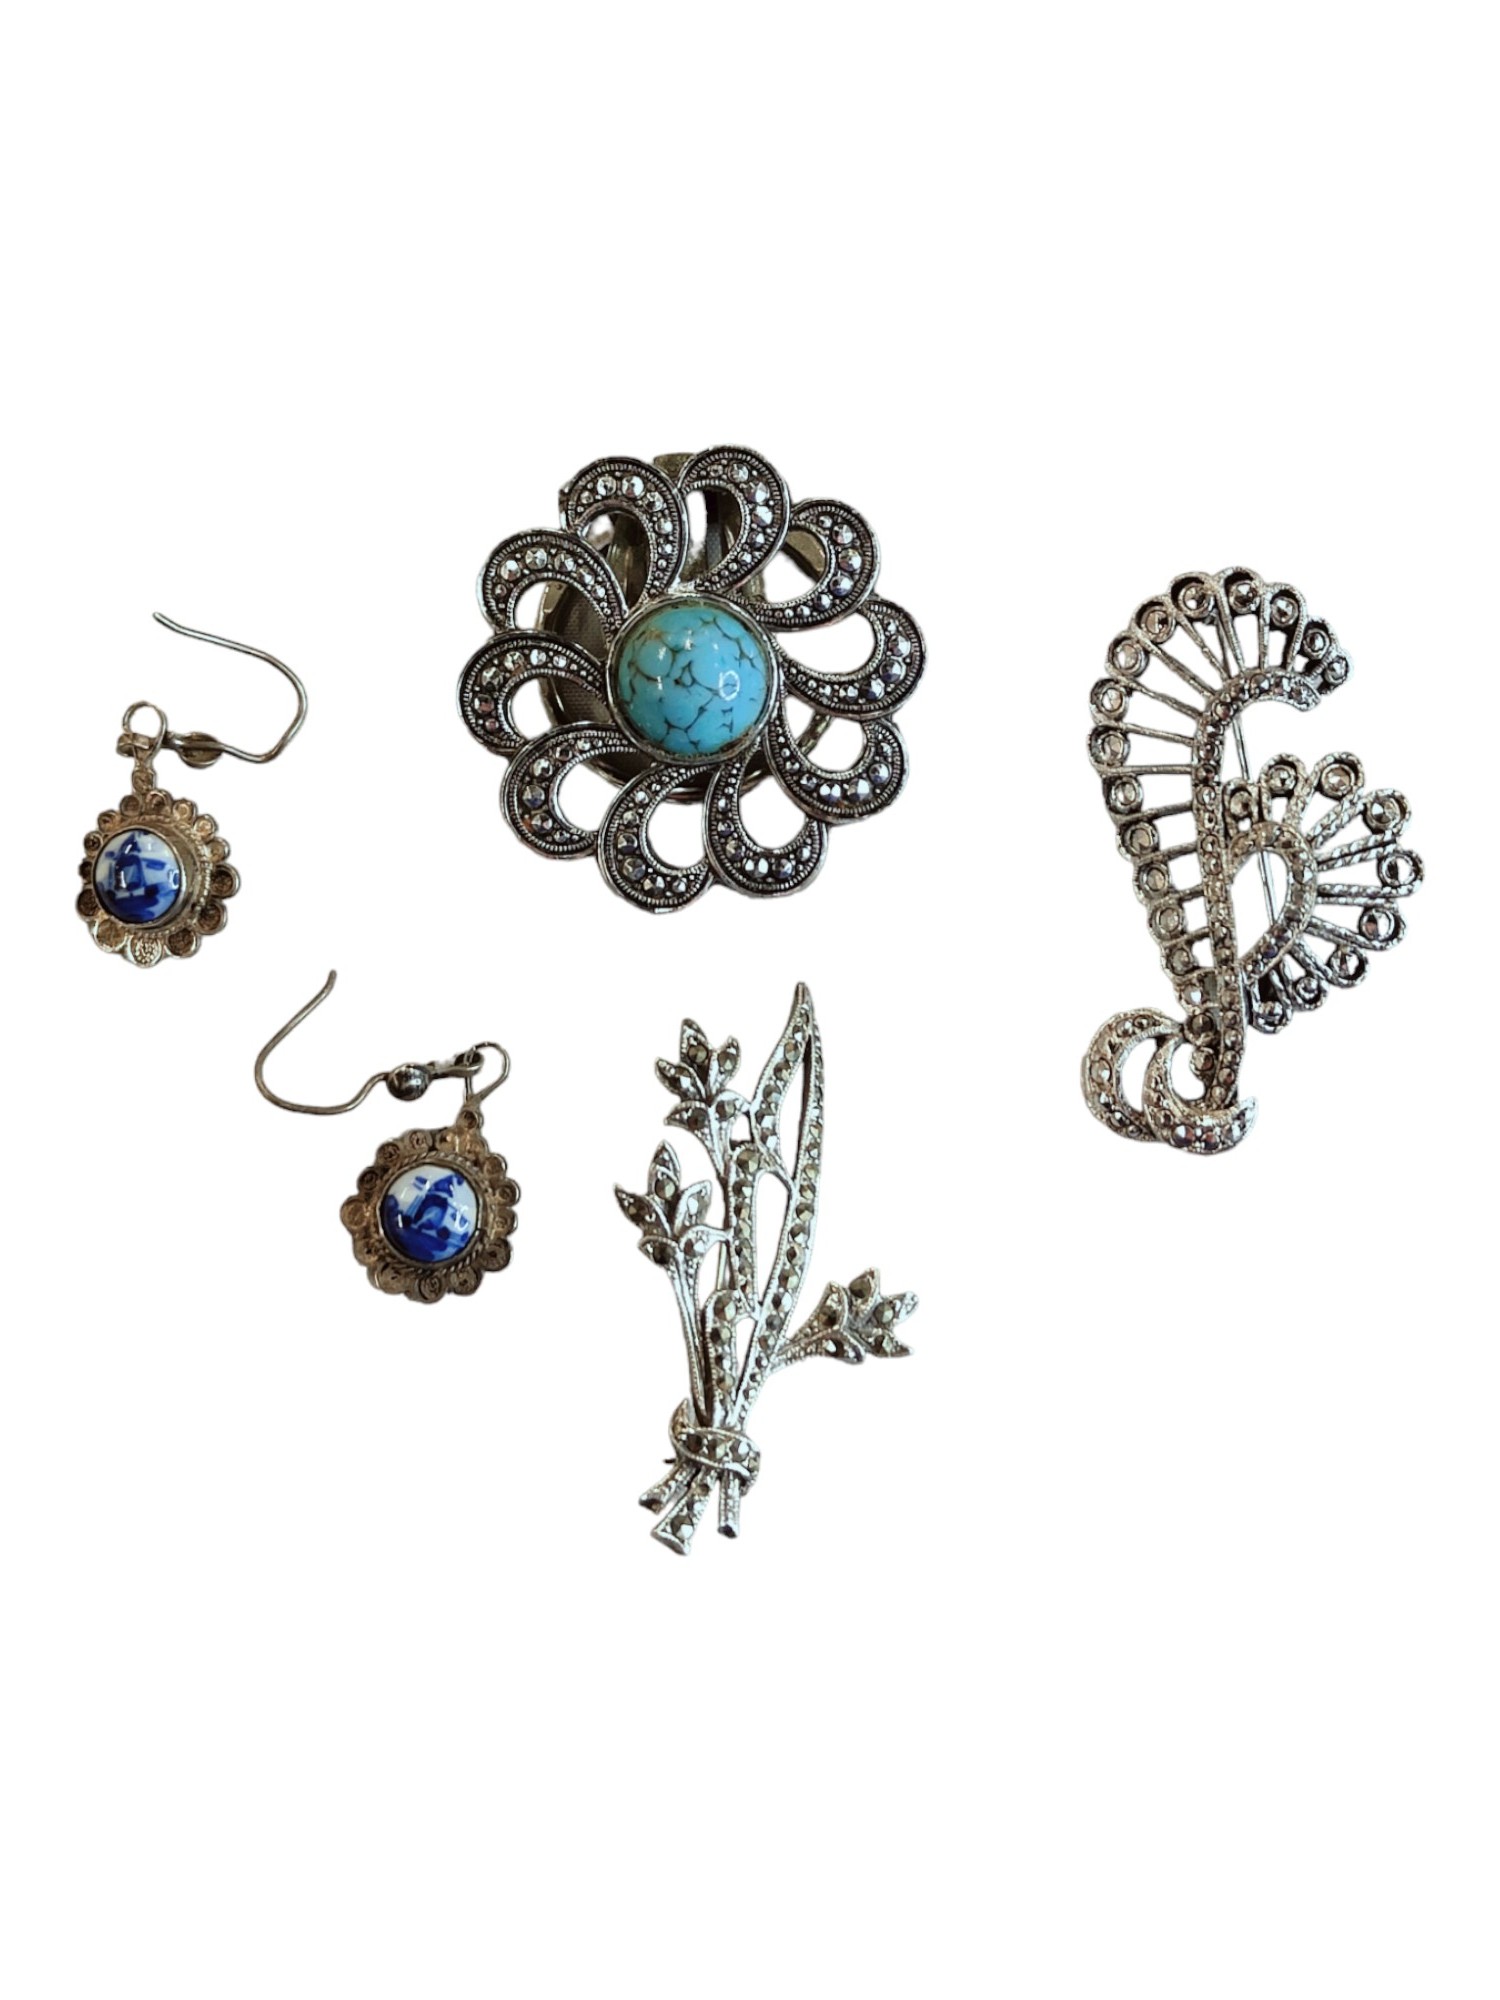 2 X SILVER MARCASITE BROOCHES, SILVER TILE DUTCH EARRINGS AND TURQUOISE BROOCH